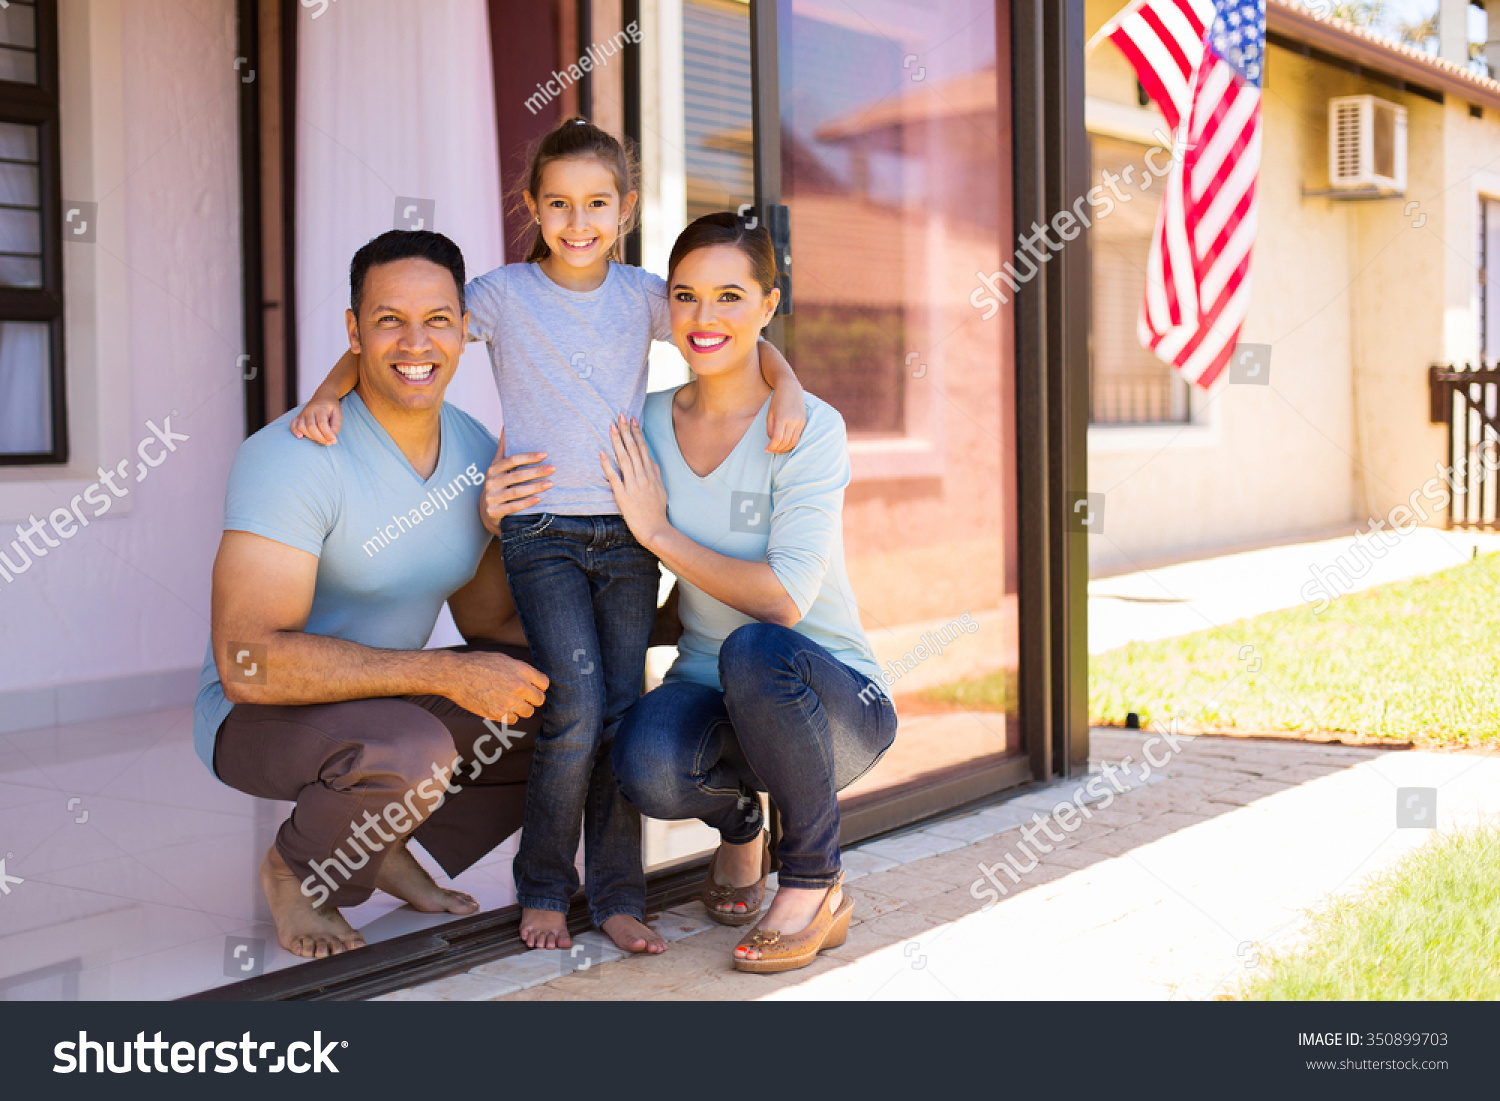 modern american family with USA flag on background #350899703